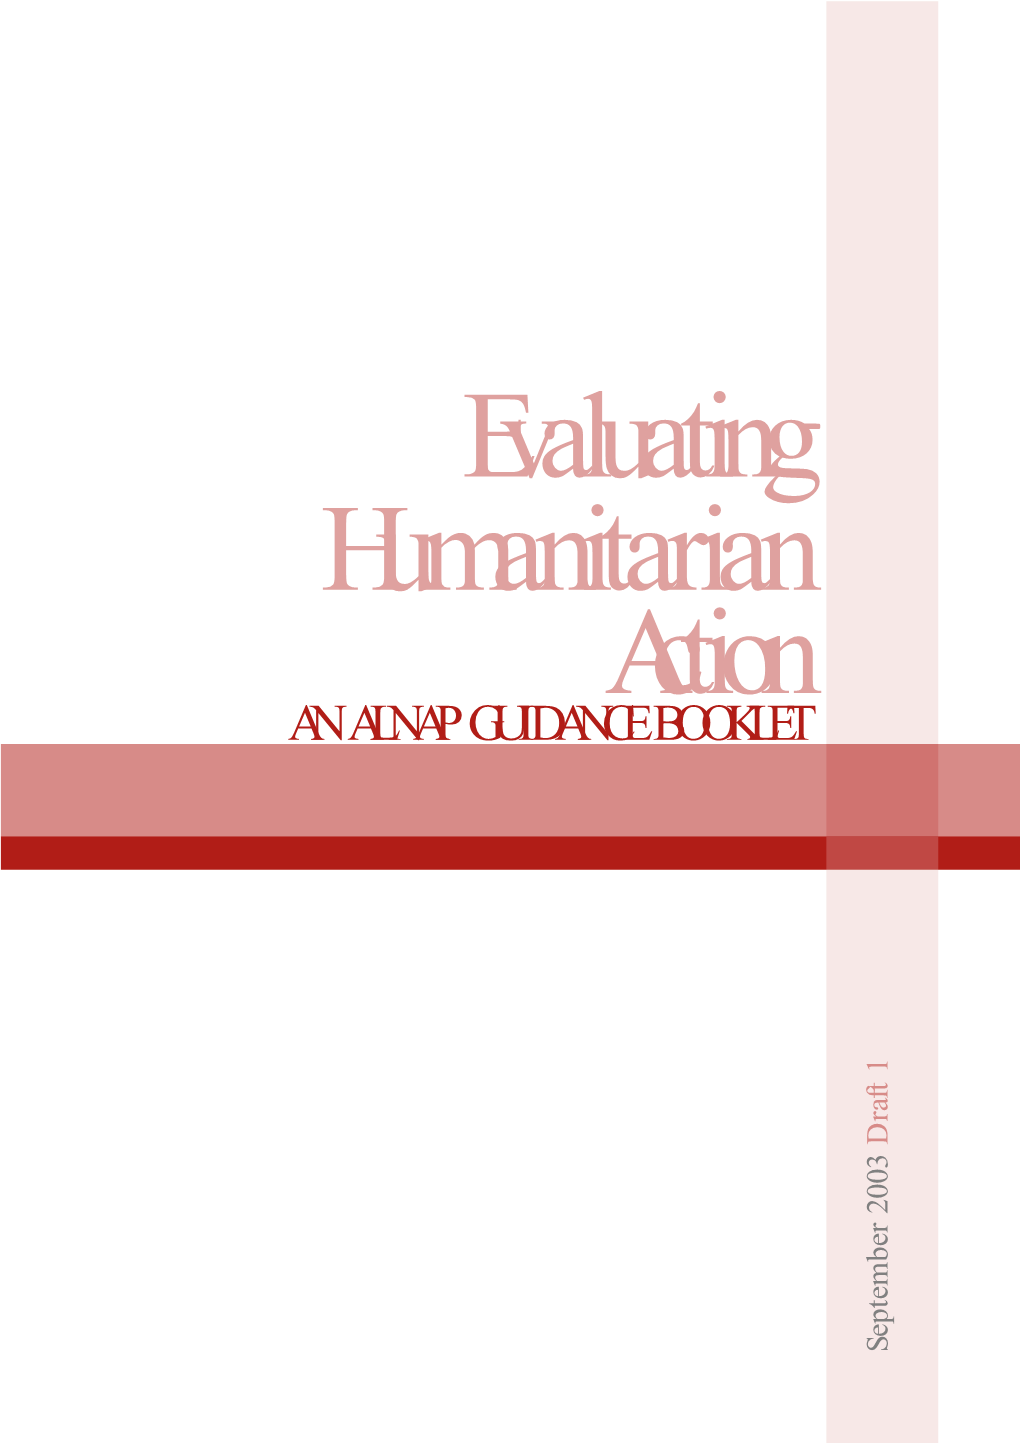 2003. Evaluating Humanitarian Action. an ALNAP Guidance Booklet